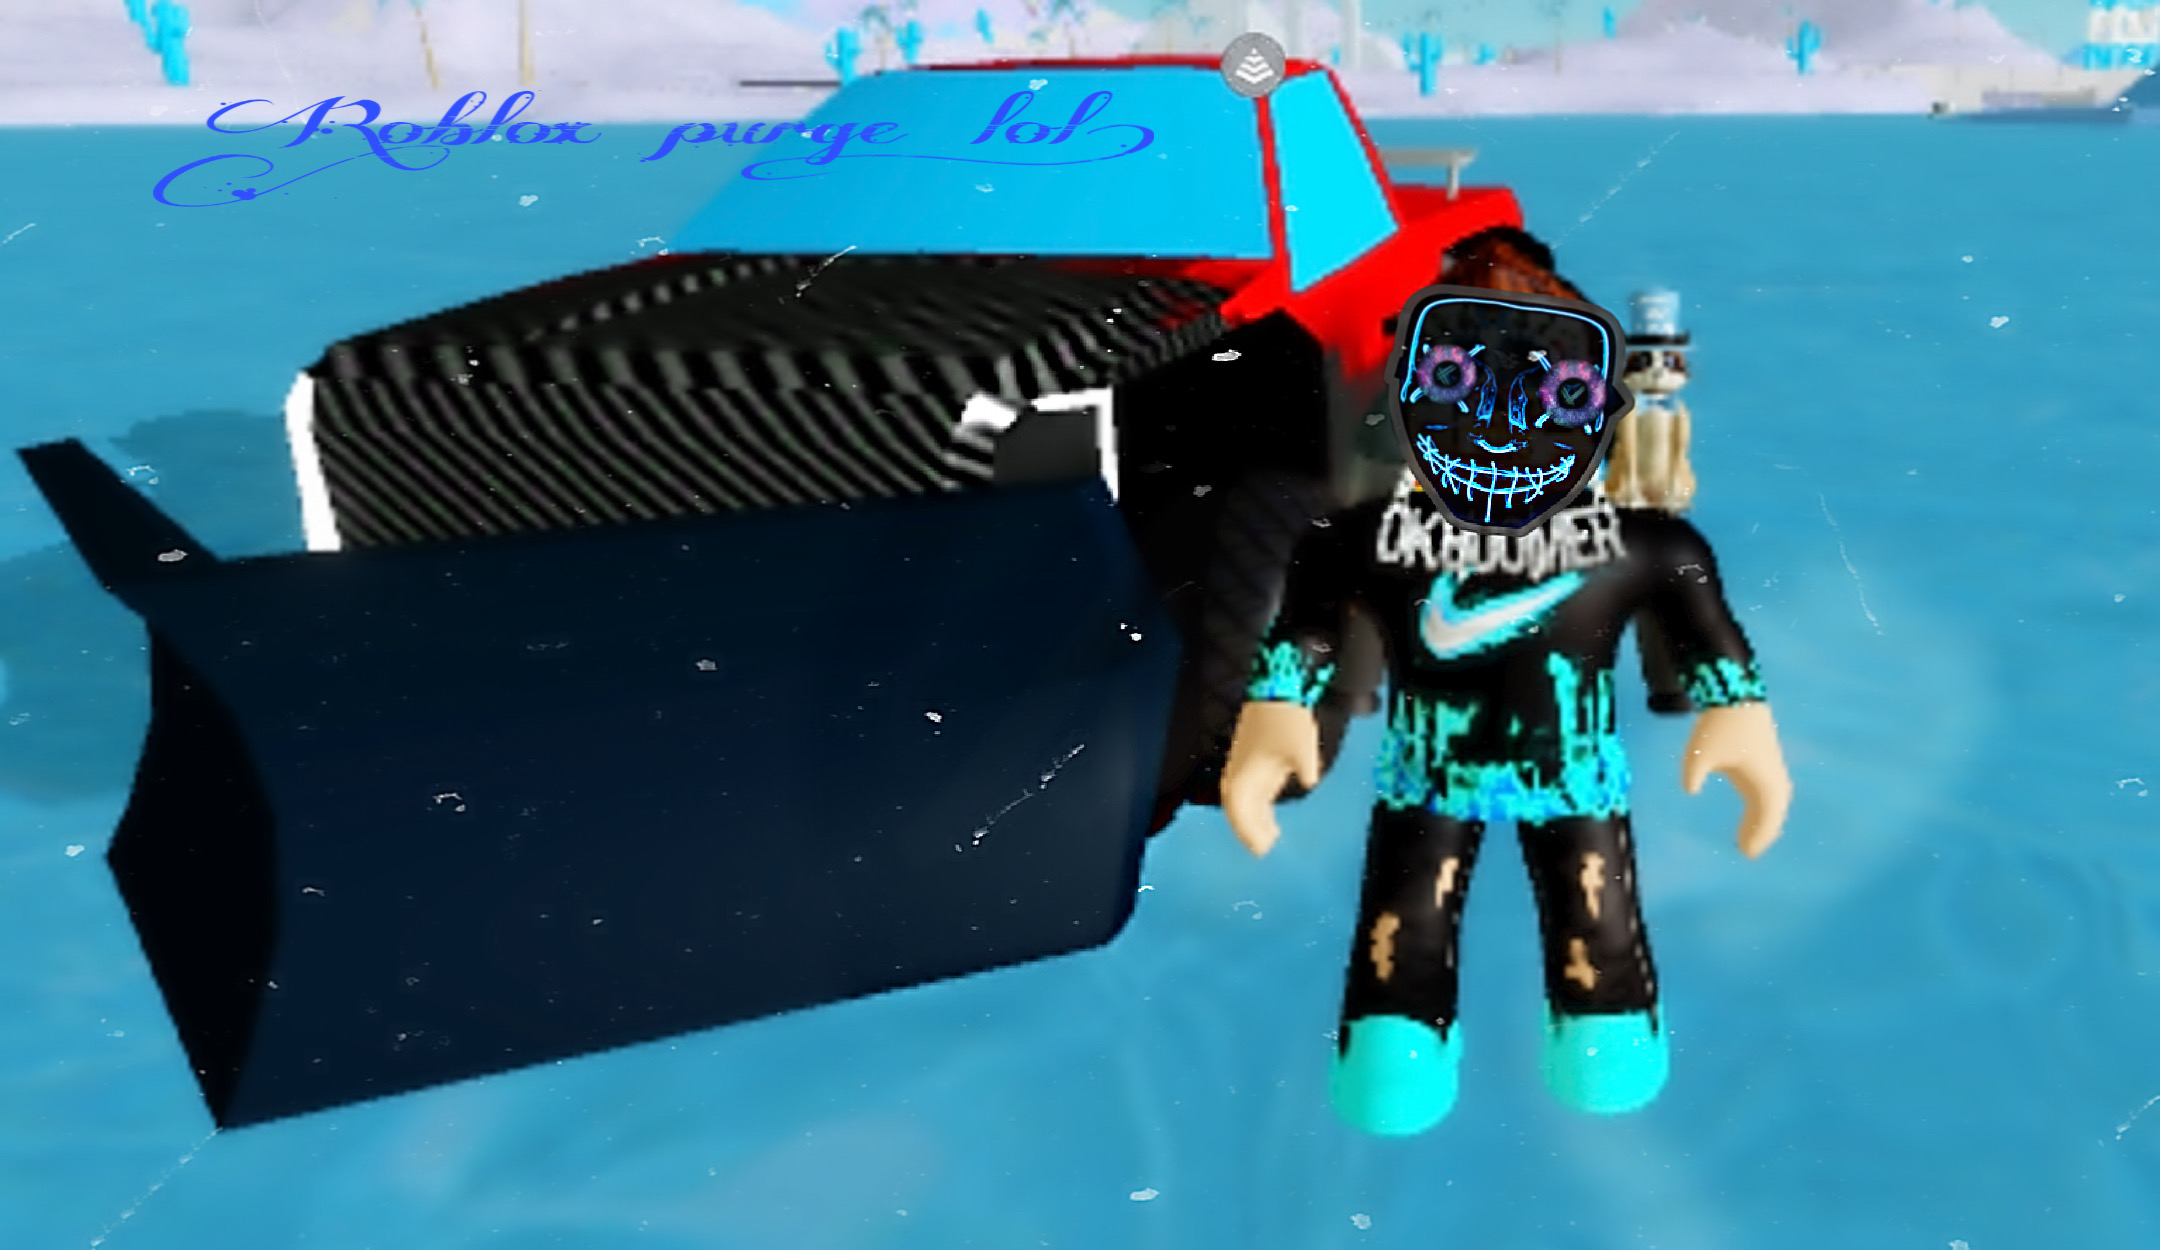 Roblox Purgemask Image By Leandrew1155 - scuba experience roblox